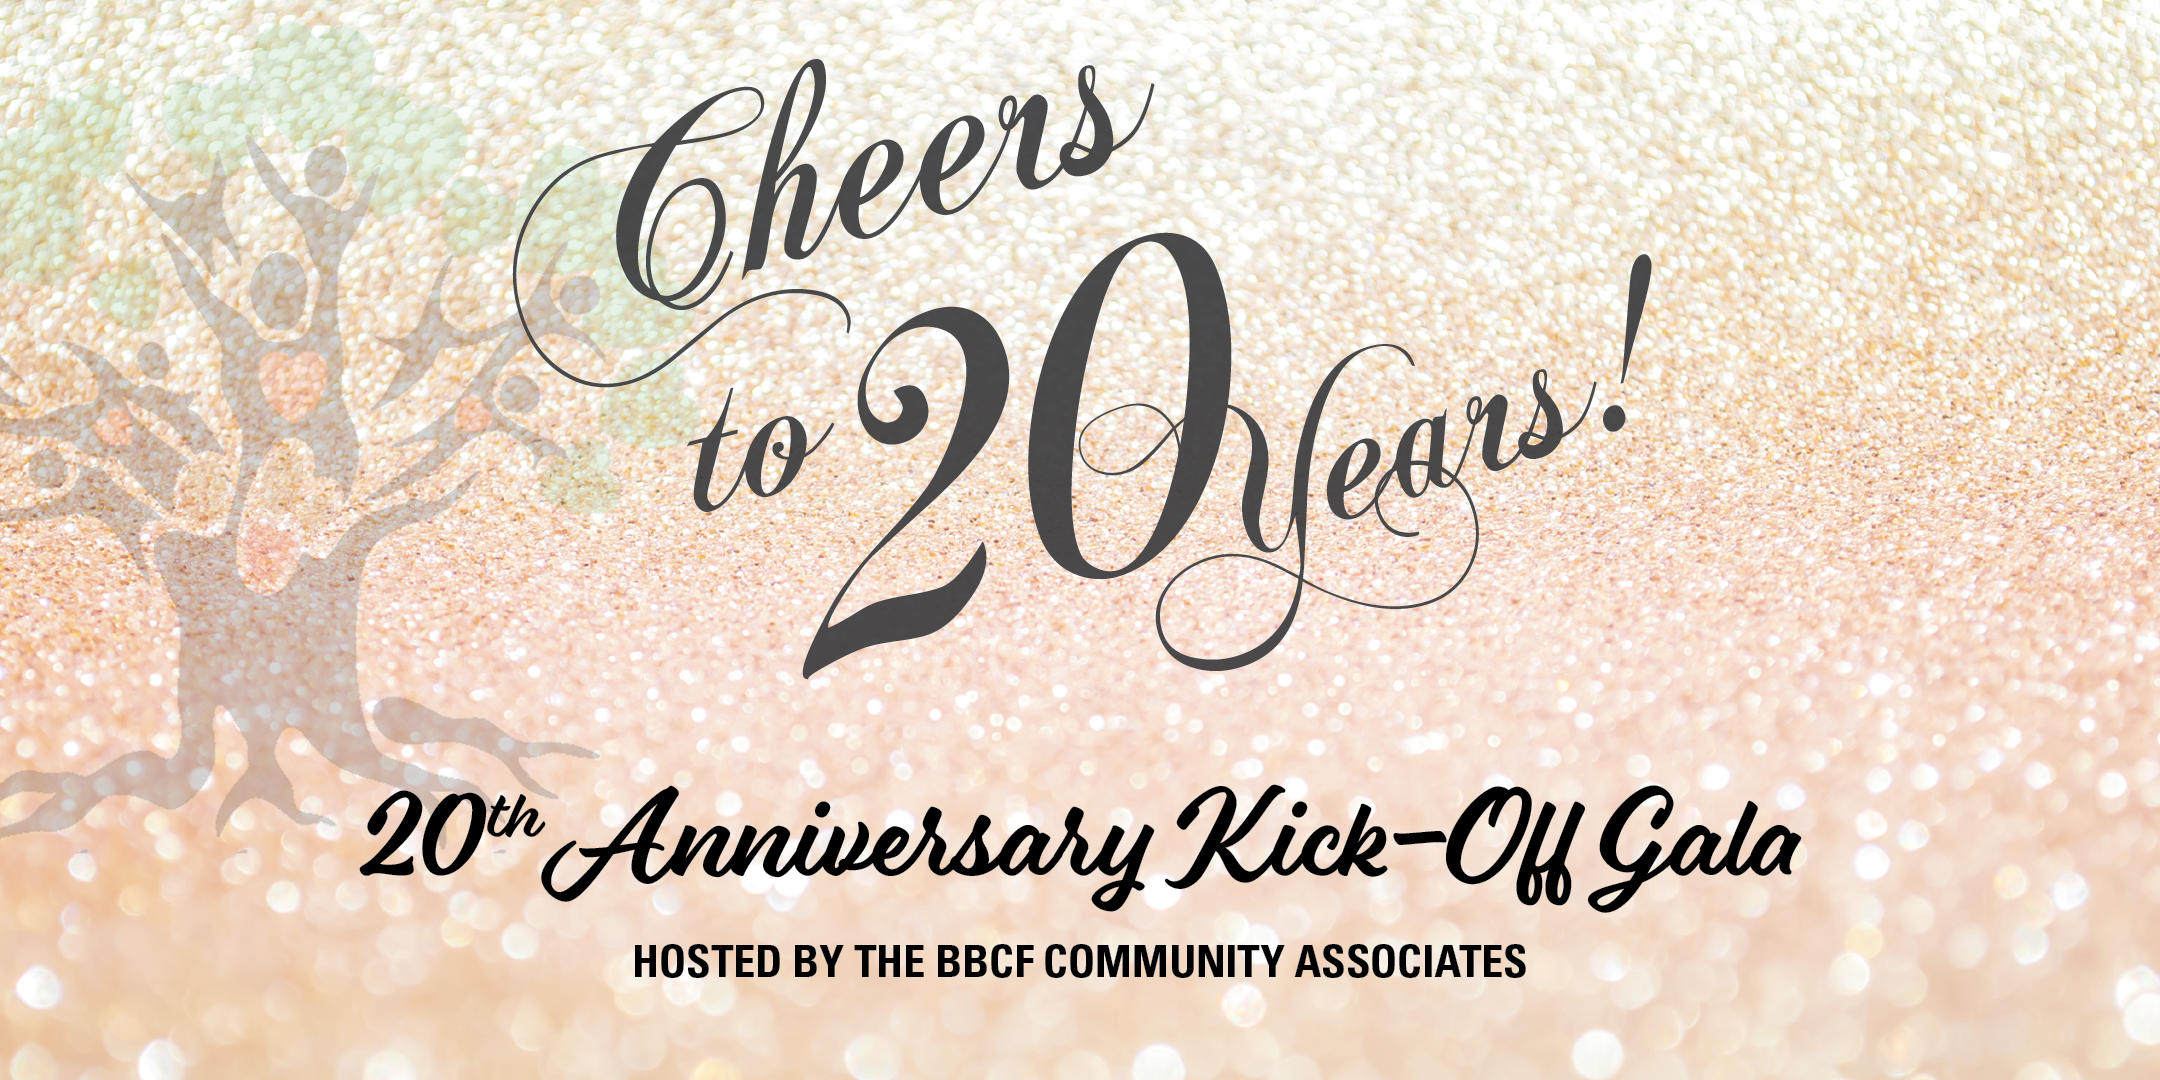 Cheers to 20 years! 20th Anniversary Kick-Off Gala Hosted by the BBCF Community Associates